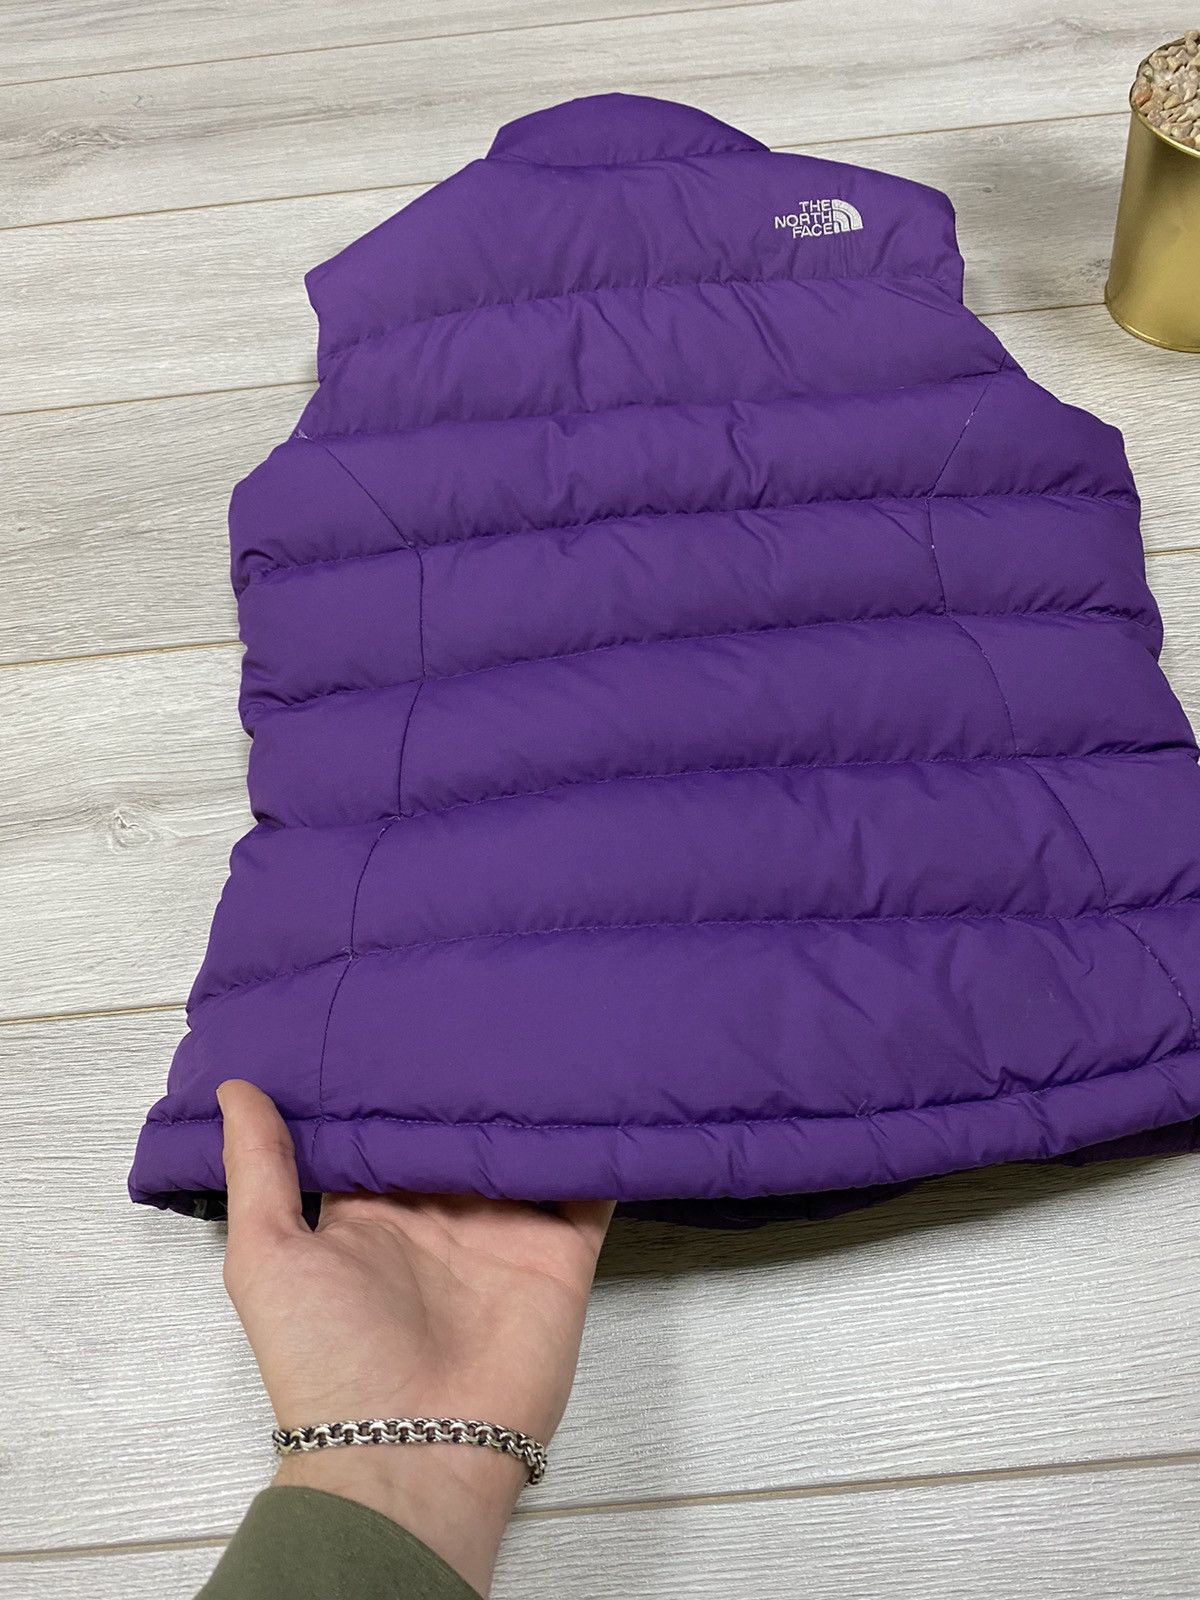 The North Face The North Face 700 purple women down vest Size XS / US 0-2 / IT 36-38 - 5 Thumbnail